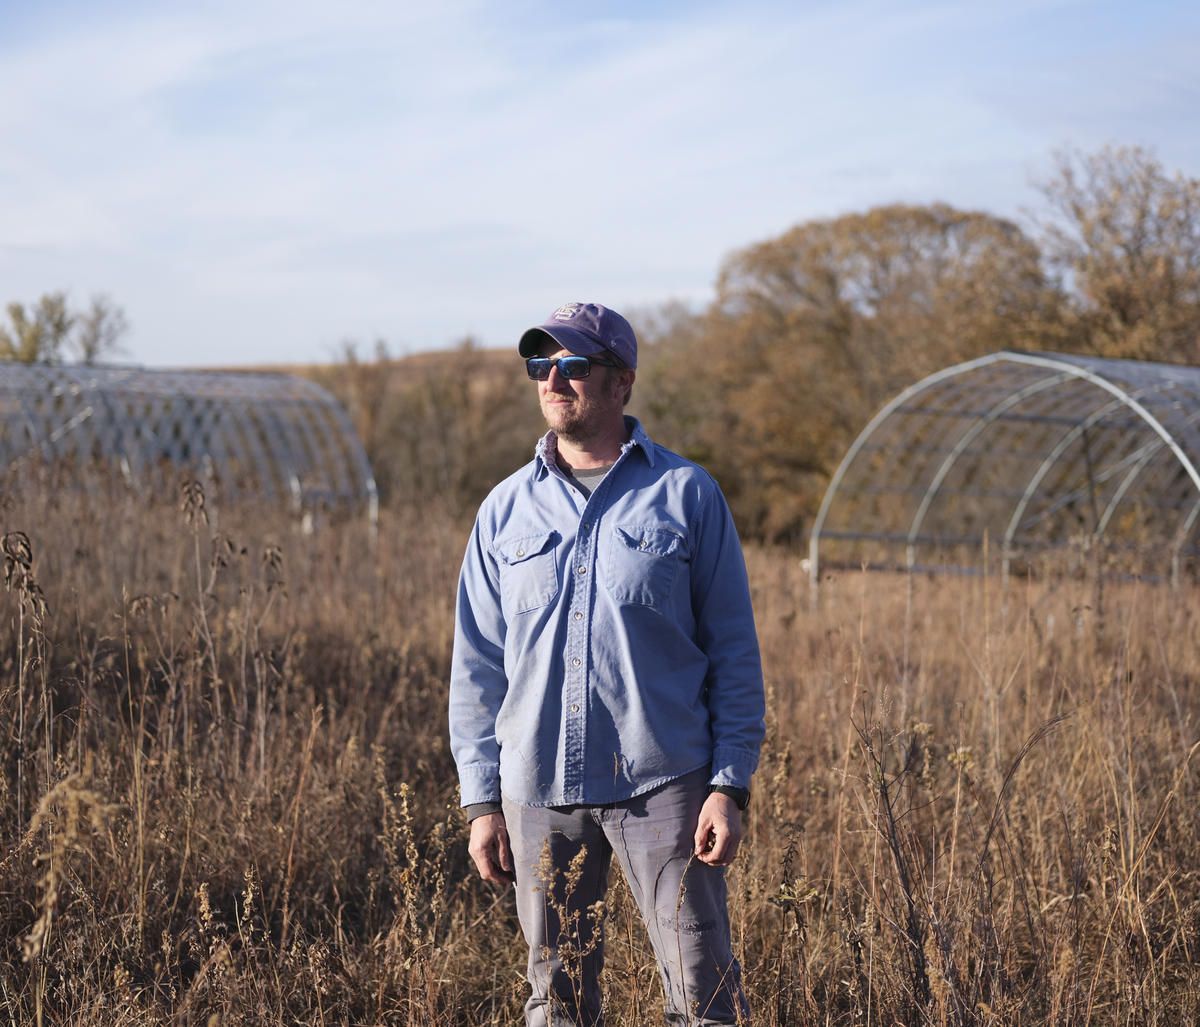 Kansas State University professor Jesse Nippert, pictured with structures that can be used to manipulate sun and rainfall on prairie plots, is the principal investigator of the Konza Prairie Long Term Ecological Research site, which is part of a national network. Image by Kyler Zeleny / For Harvest Public Media. United States, 2020.